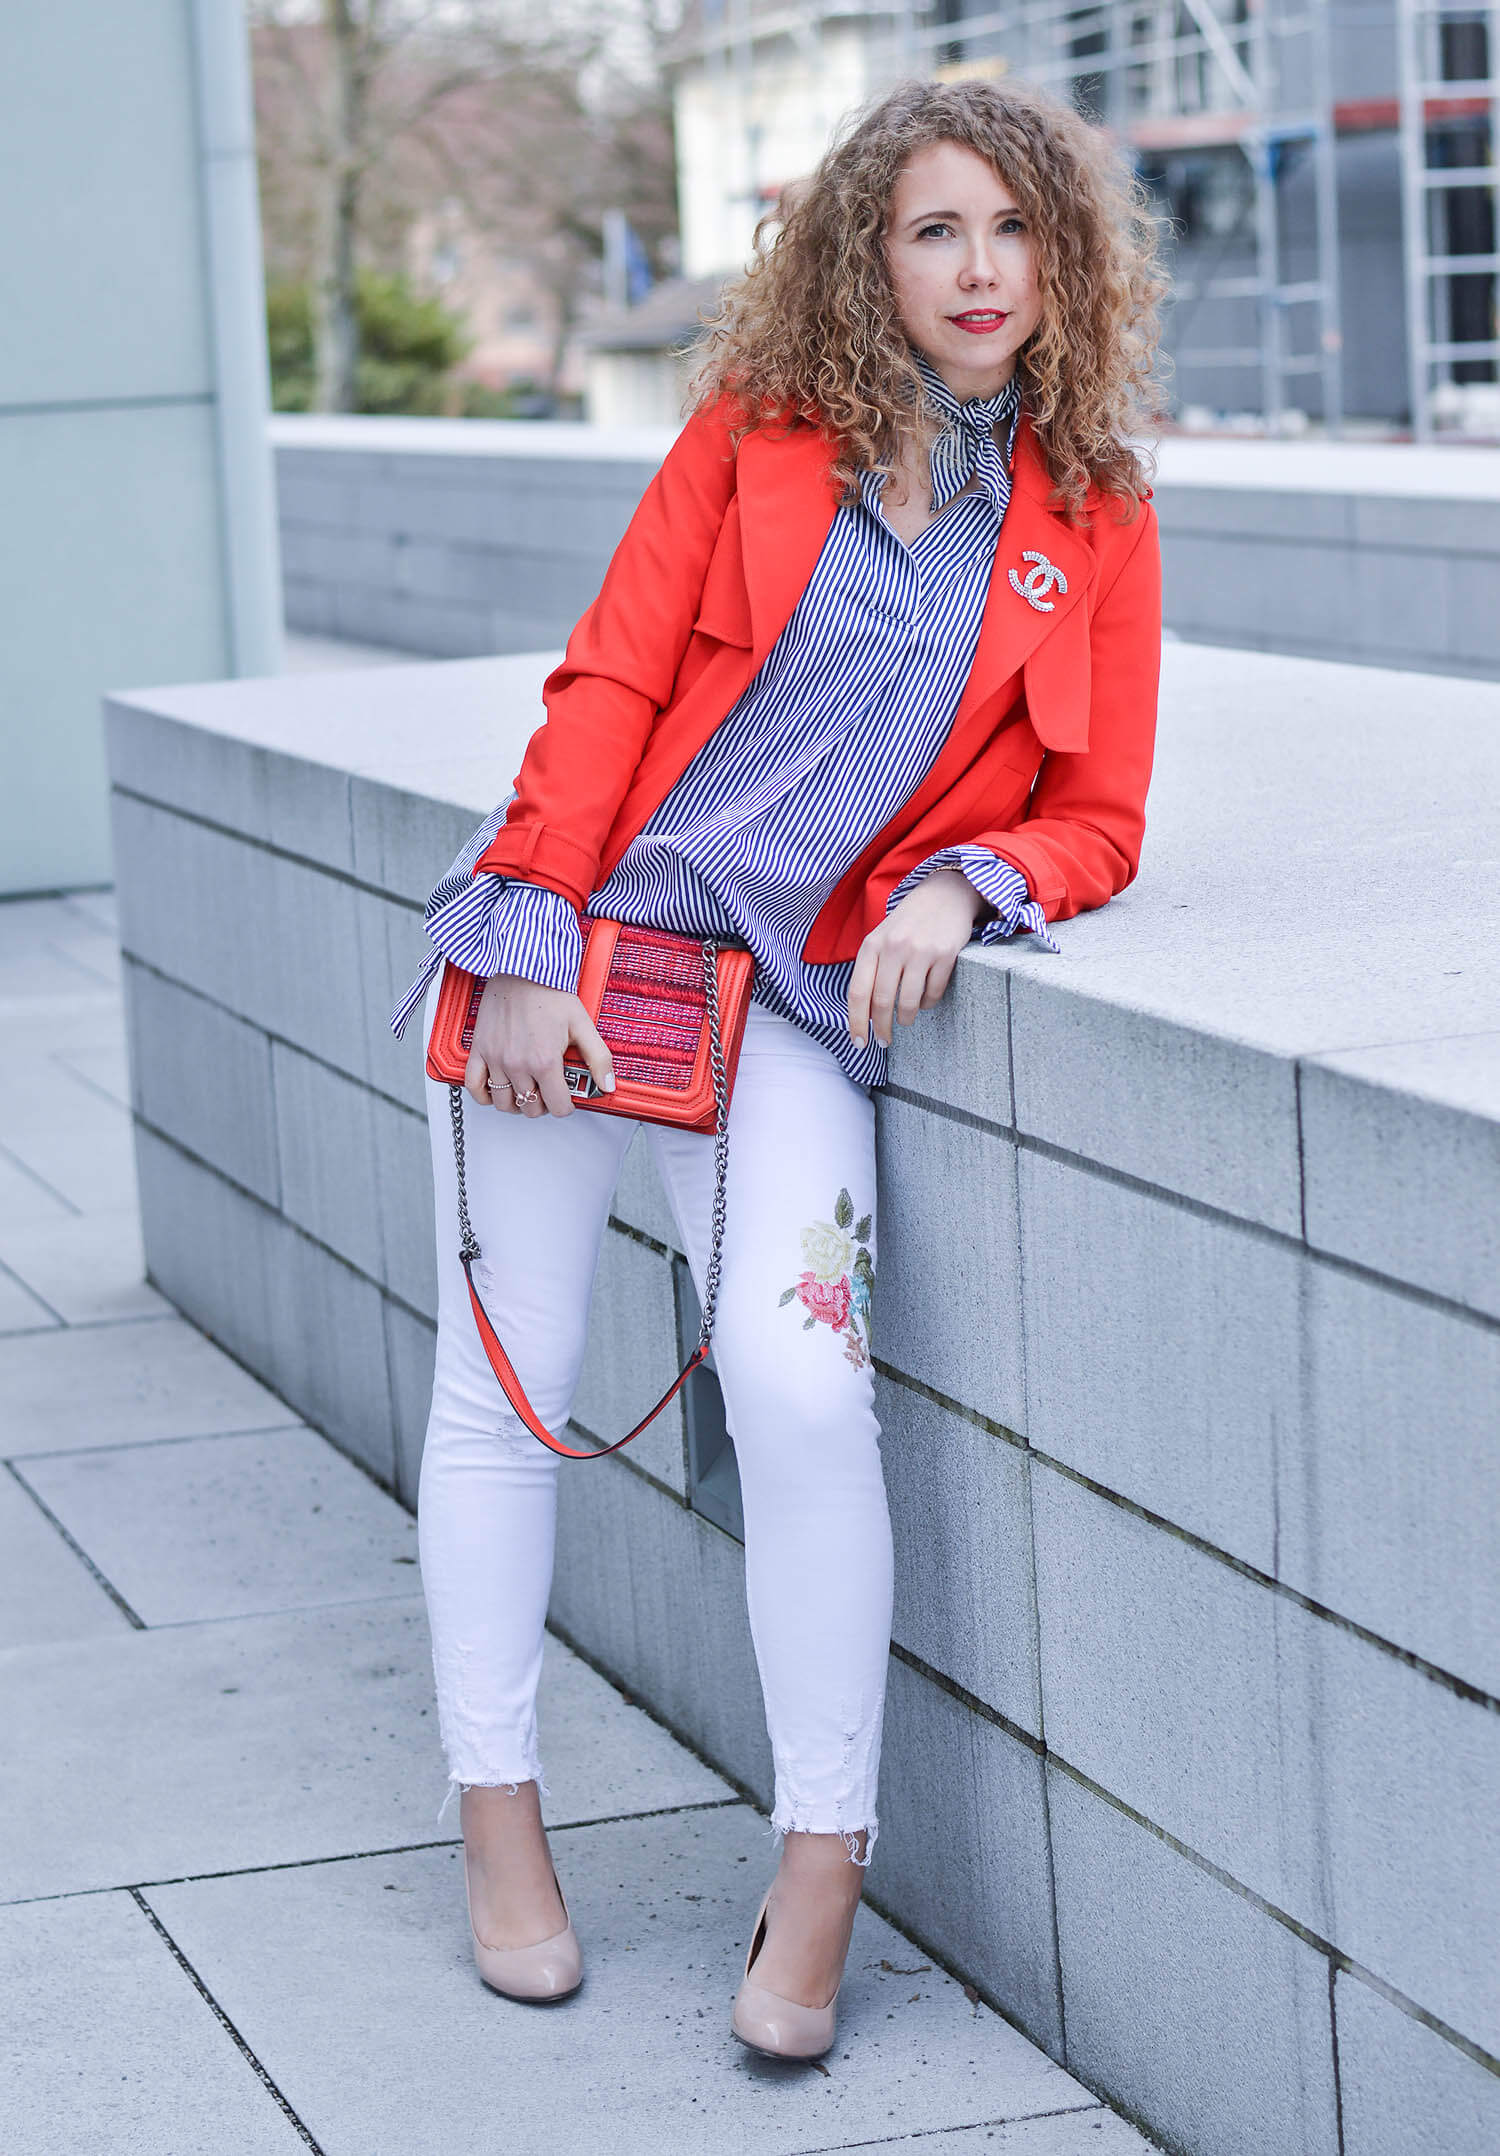 Outfit-Spring-Fashion-with-White-Denim-Blue-and-Red-Zara-Jacket-kationette-fashionblogger